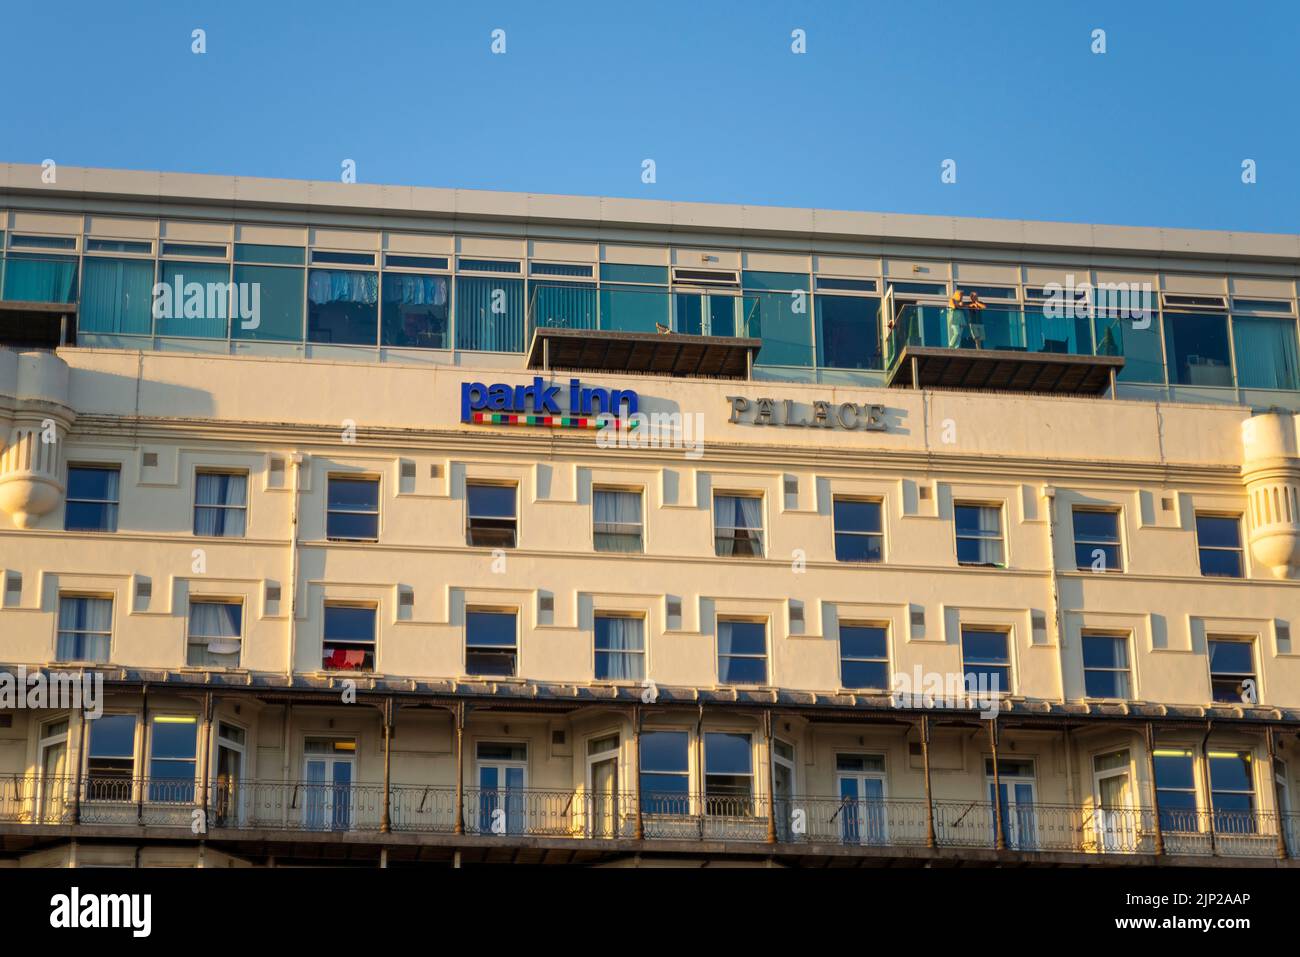 People look out from balcony of Park Inn Palace, Palace Hotel, Pier Hill, Marine Parade, Southend on Sea, Essex. Seafront hotel late evening glow Stock Photo